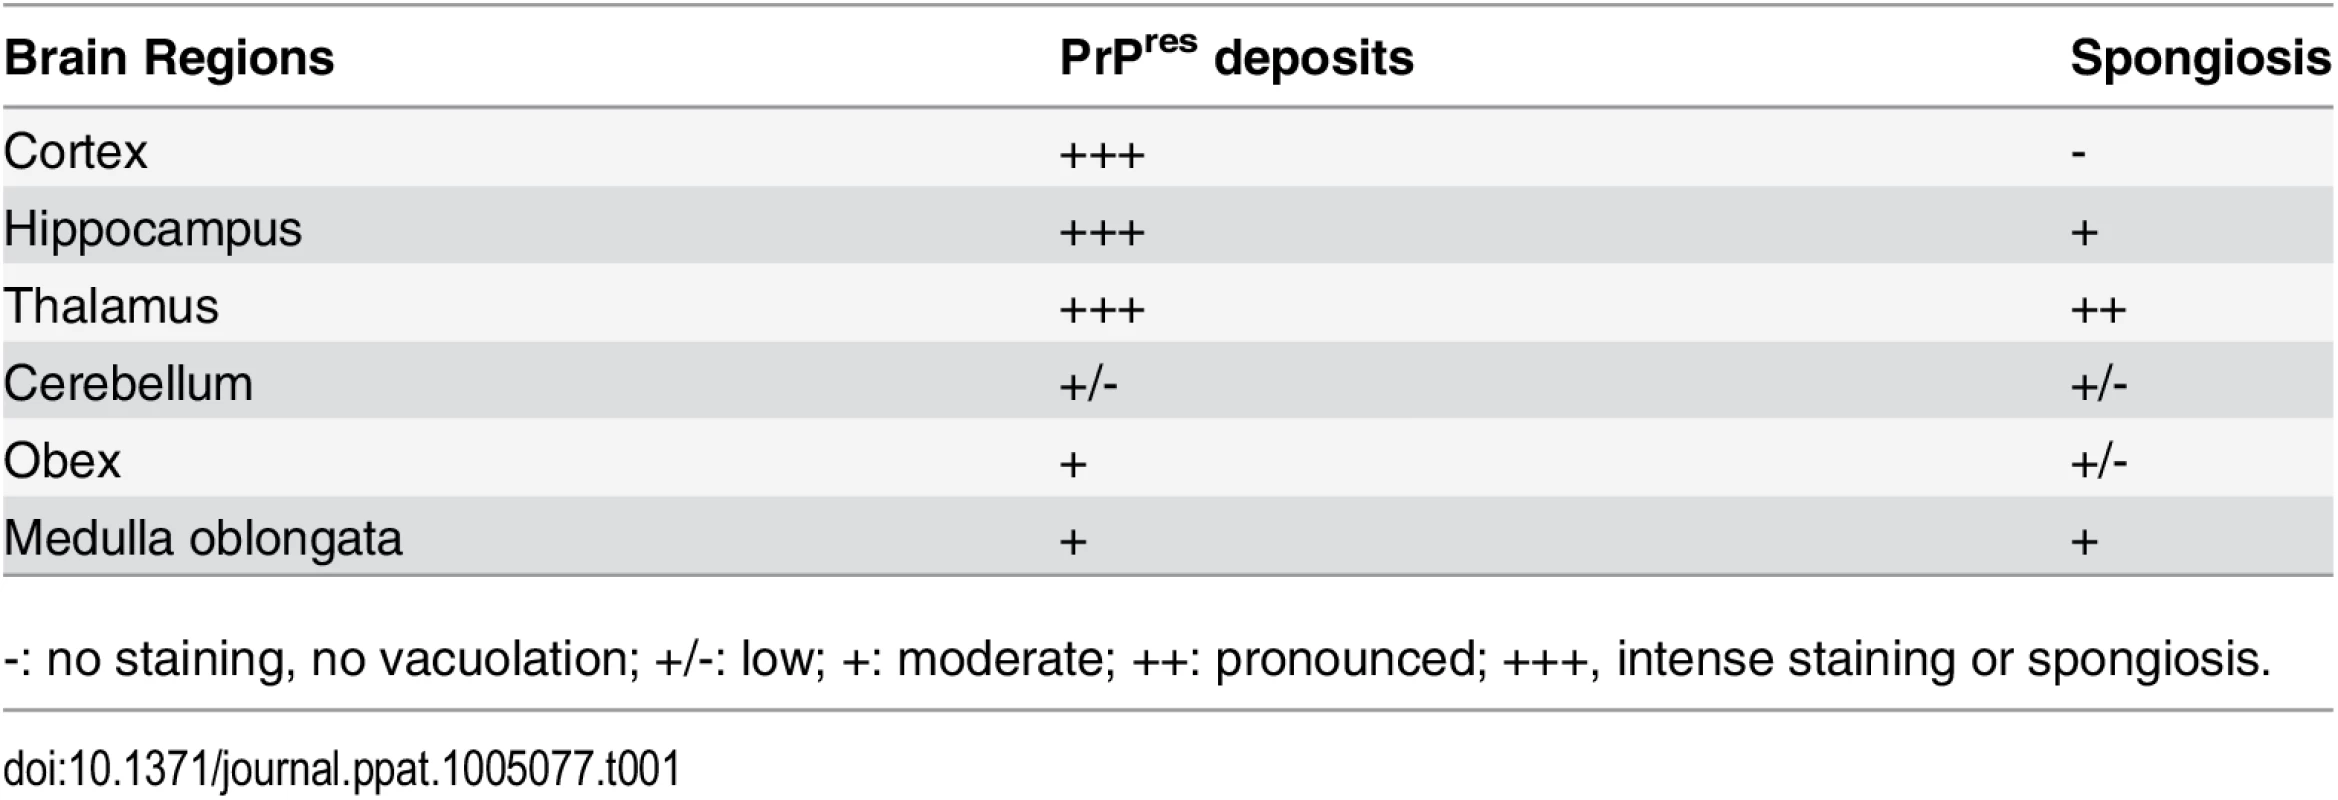 Regional distribution of PrP<sup>res</sup> and vacuolation in the brain of transgenic rabbits expressing ovine PrP challenged with LA21K <i>fast</i> prions.